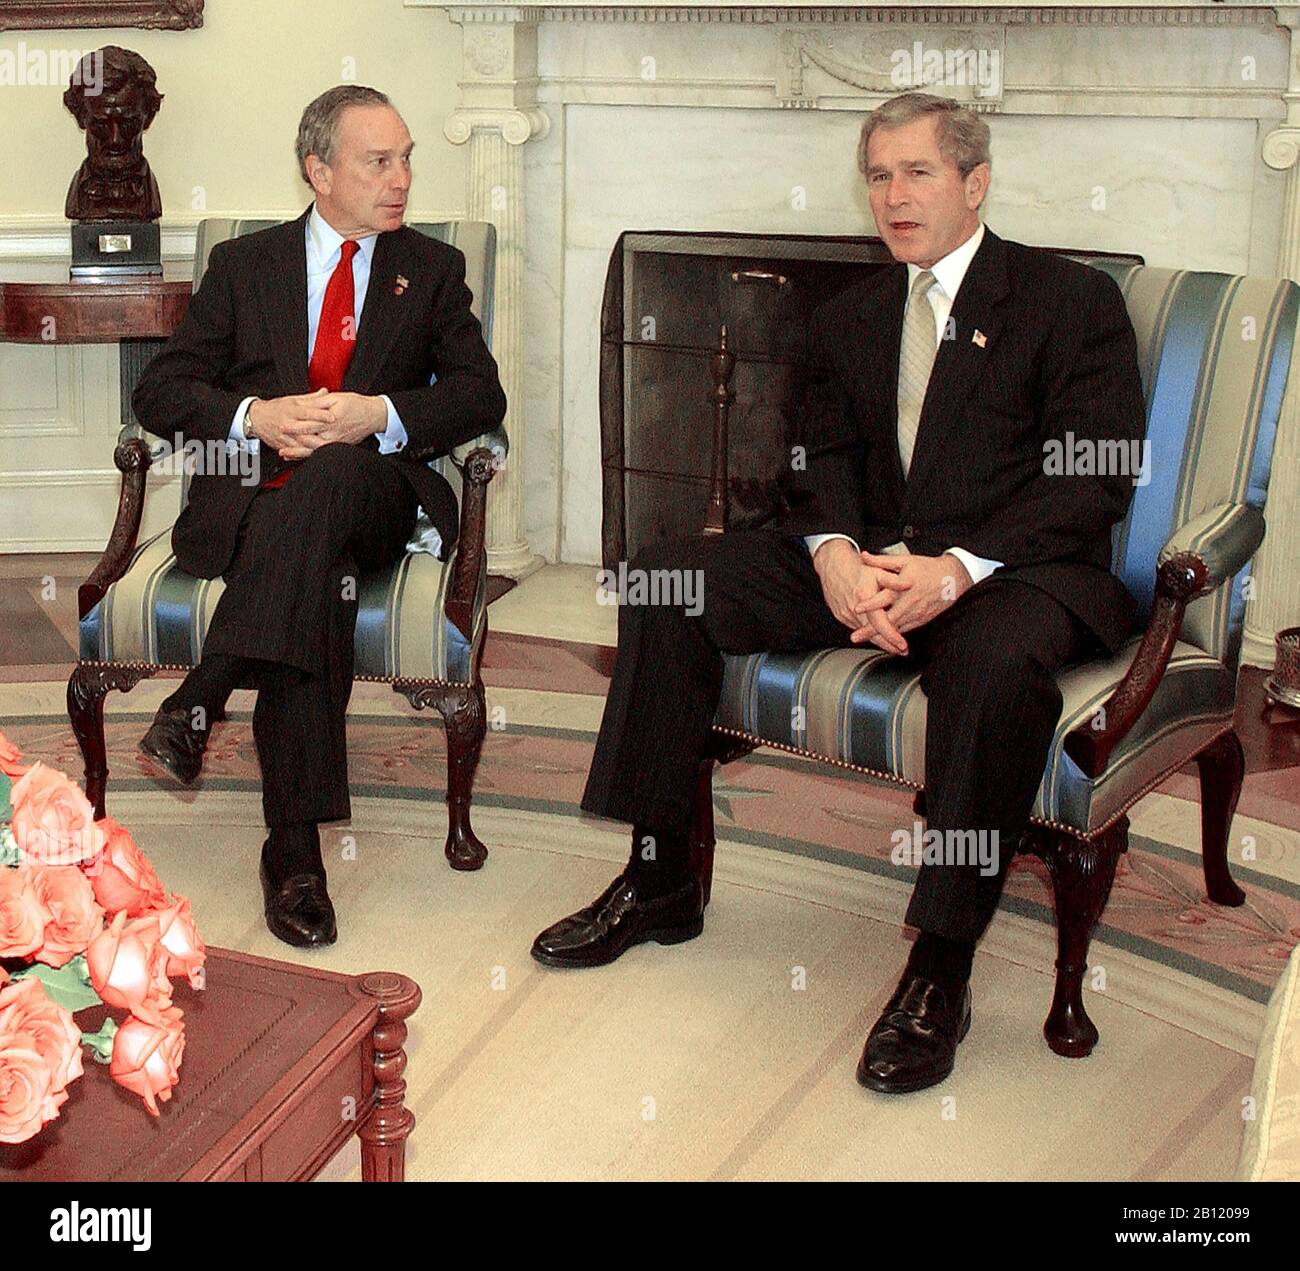 New York City Mayor Michael Bloomberg meets United States President George W. Bush in the Oval Office at the White House in Washington on March 19, 2003..Credit: Ron Sachs / CNP | usage worldwide Stock Photo